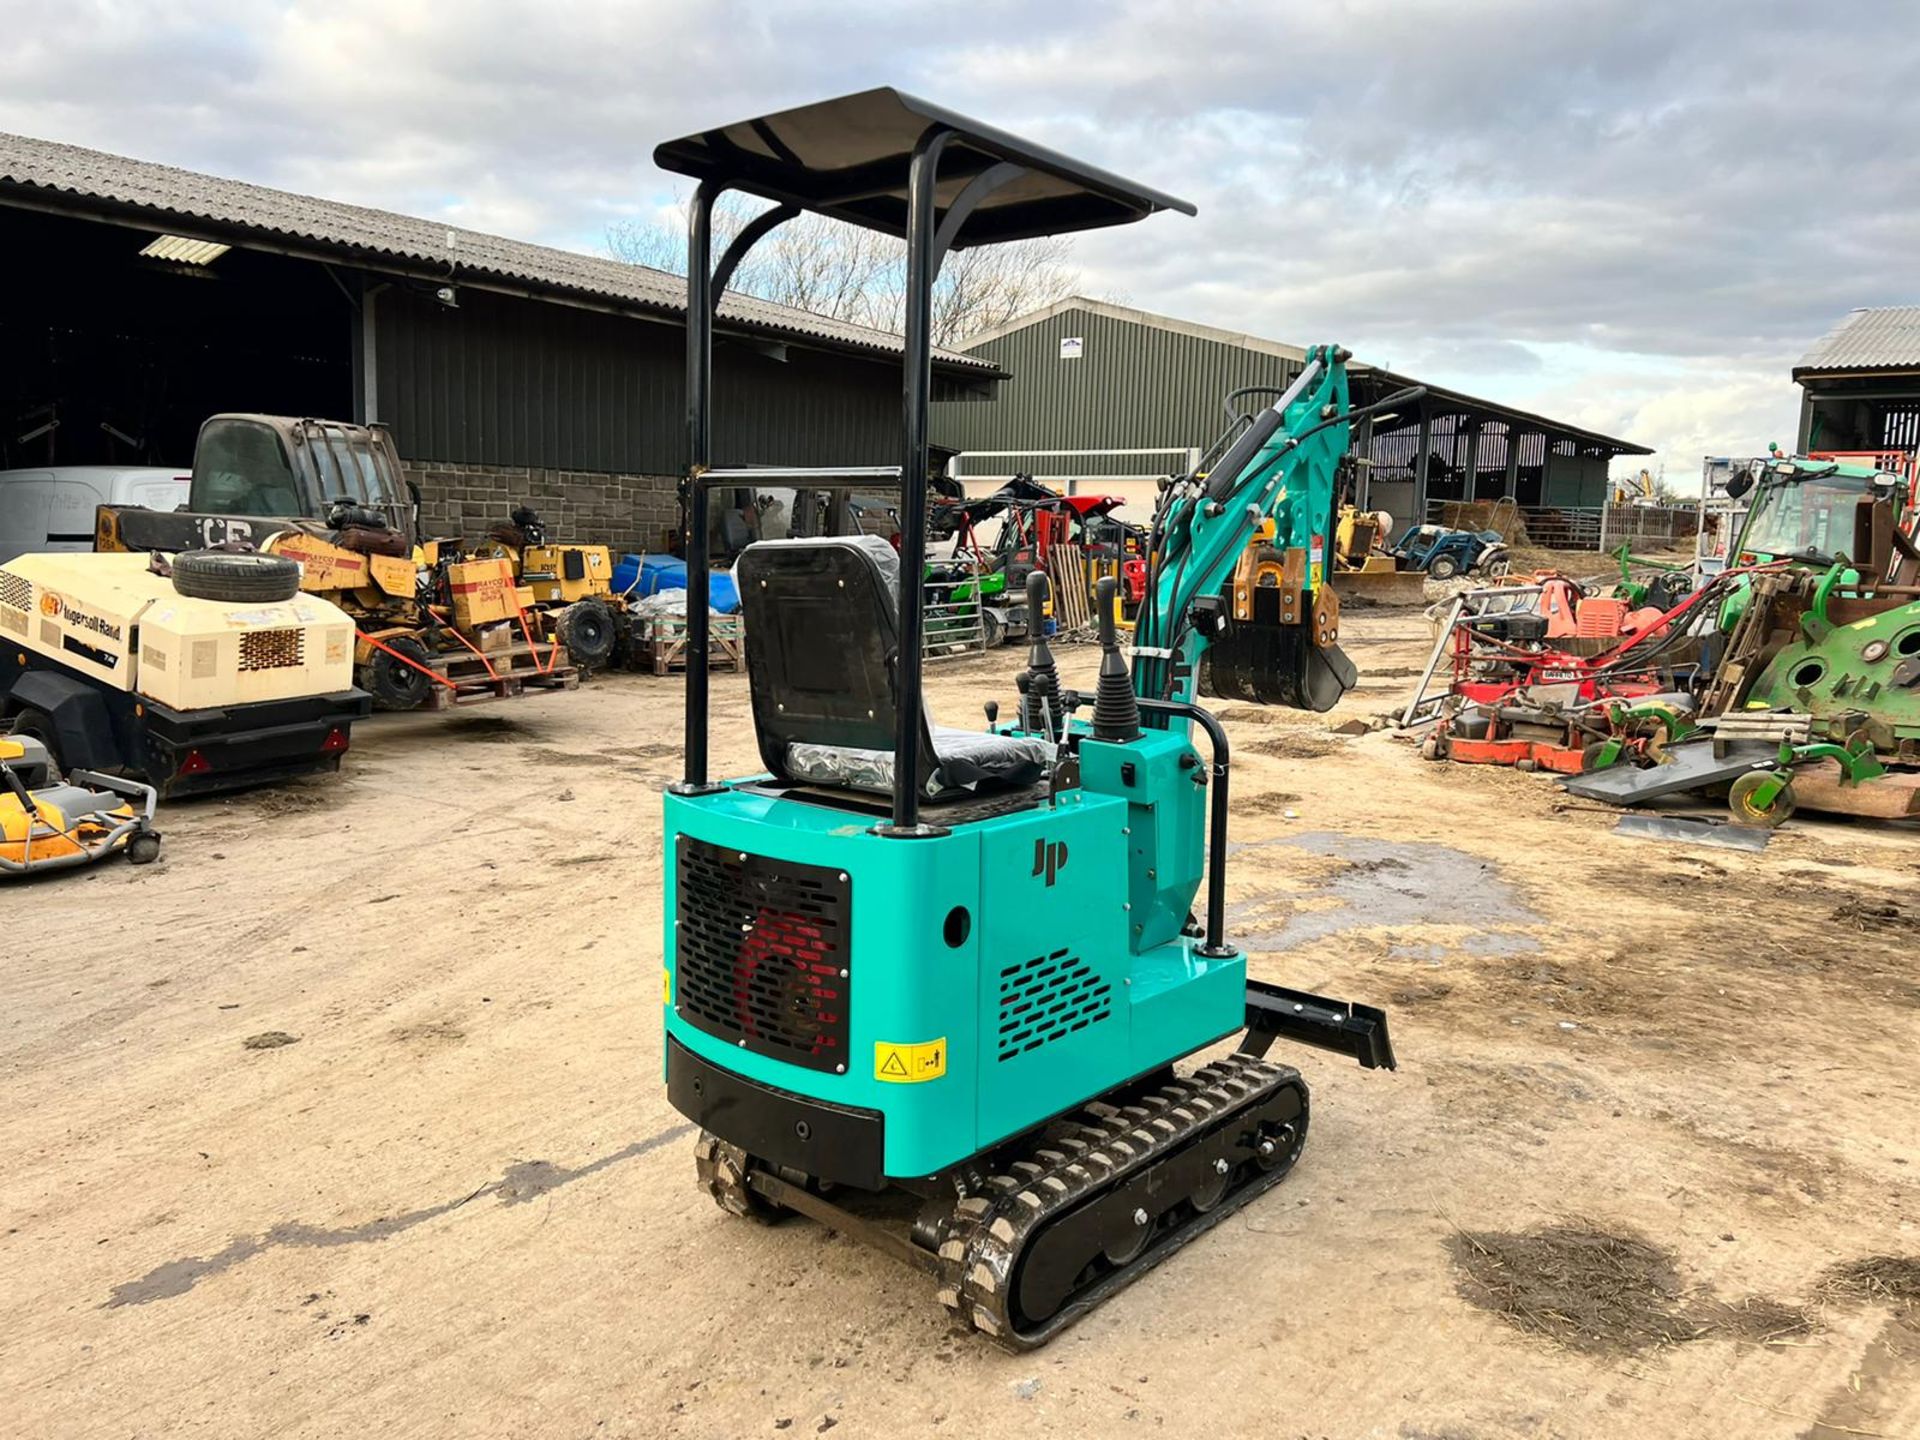 New And Unused JPC PC10 1 Ton Mini Digger, Runs Drives And Digs, Rubber Tracks *PLUS VAT* - Image 5 of 10